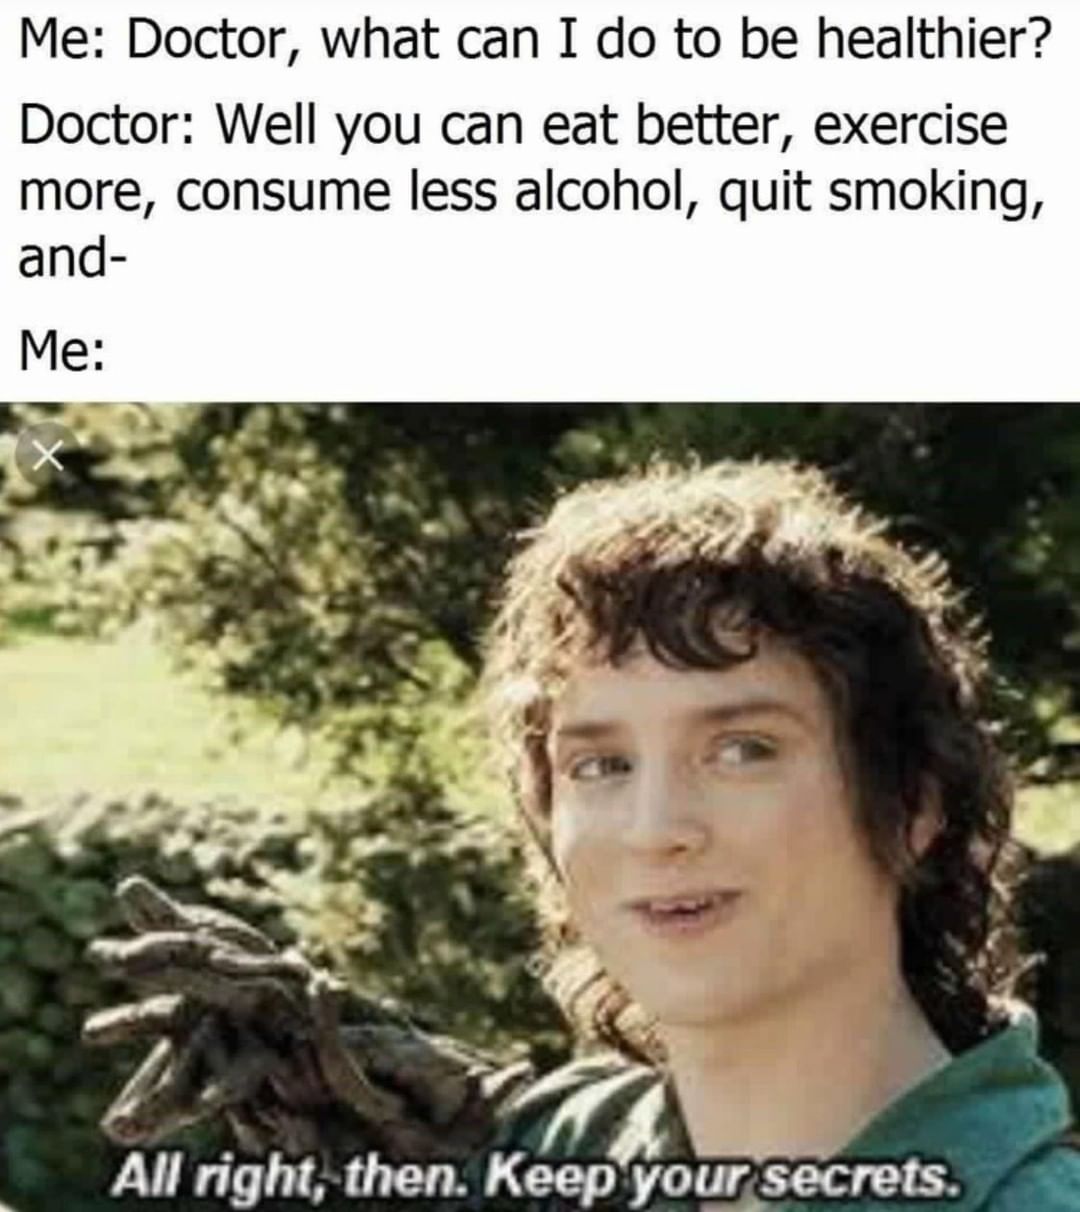 Me: Doctor, what can I do to be healthier? Doctor: Well you can eat better, exercise more, consume less alcohol, quit smoking, and- Me: All right, then. Keep your secrets.